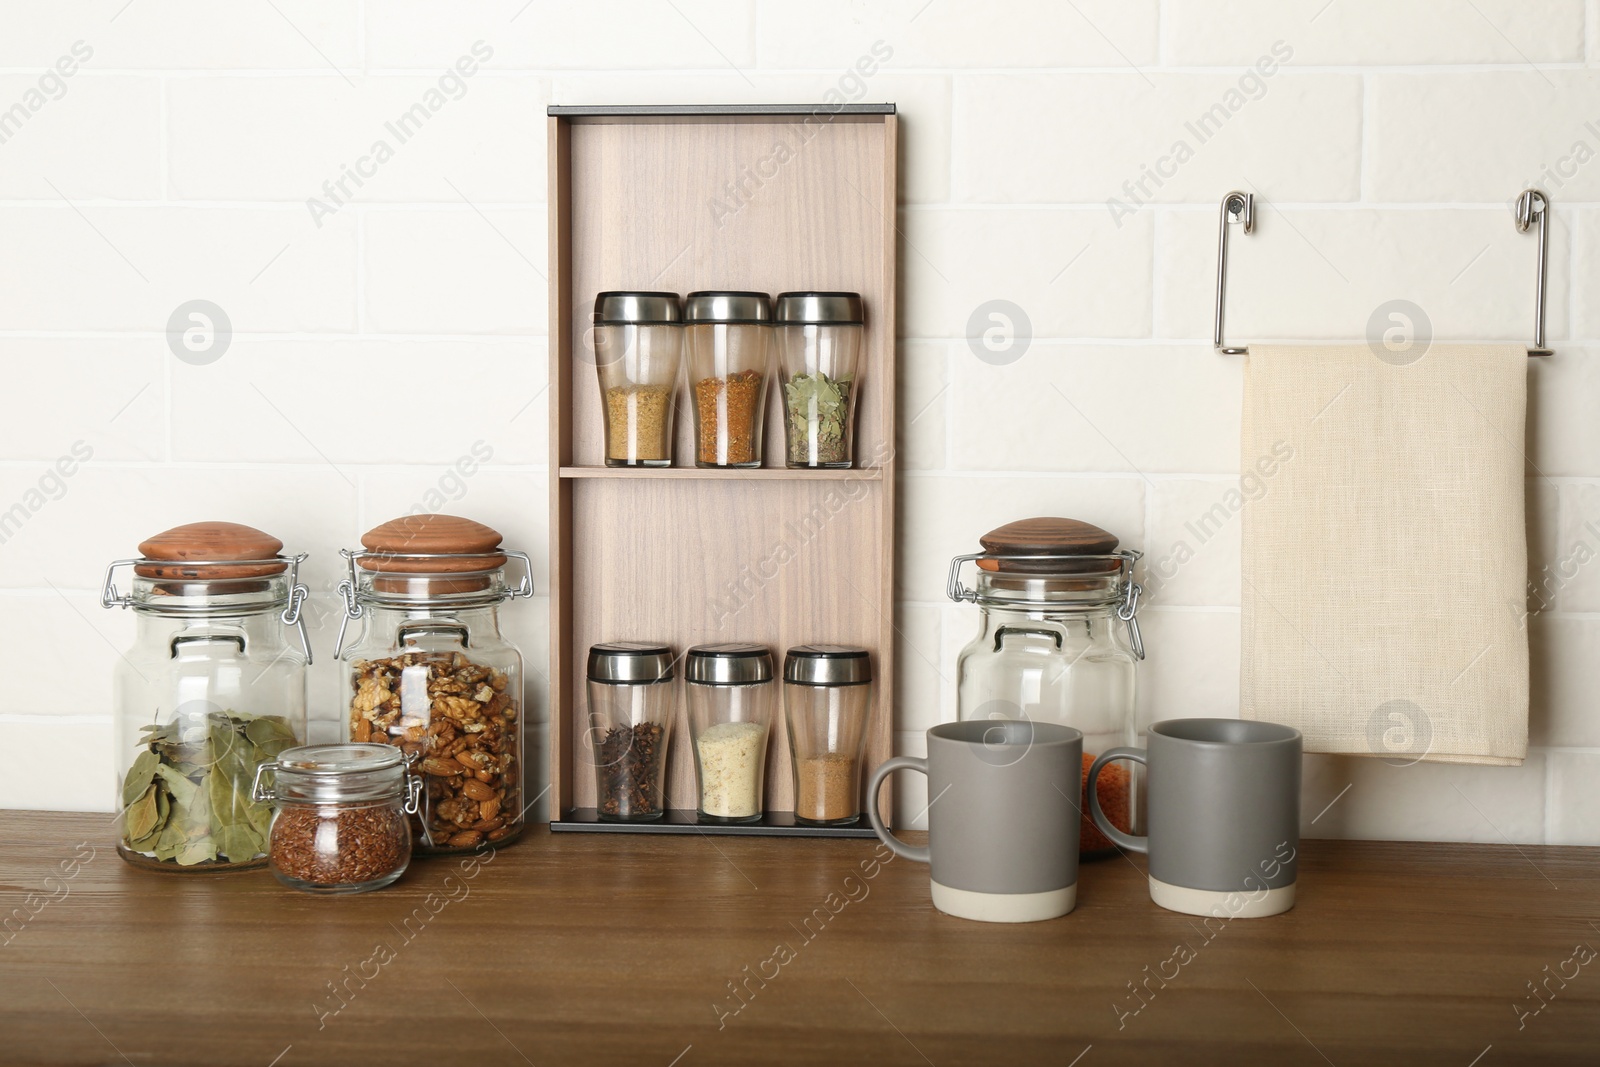 Photo of Set of spices and different dishware on wooden table near white brick wall in kitchen